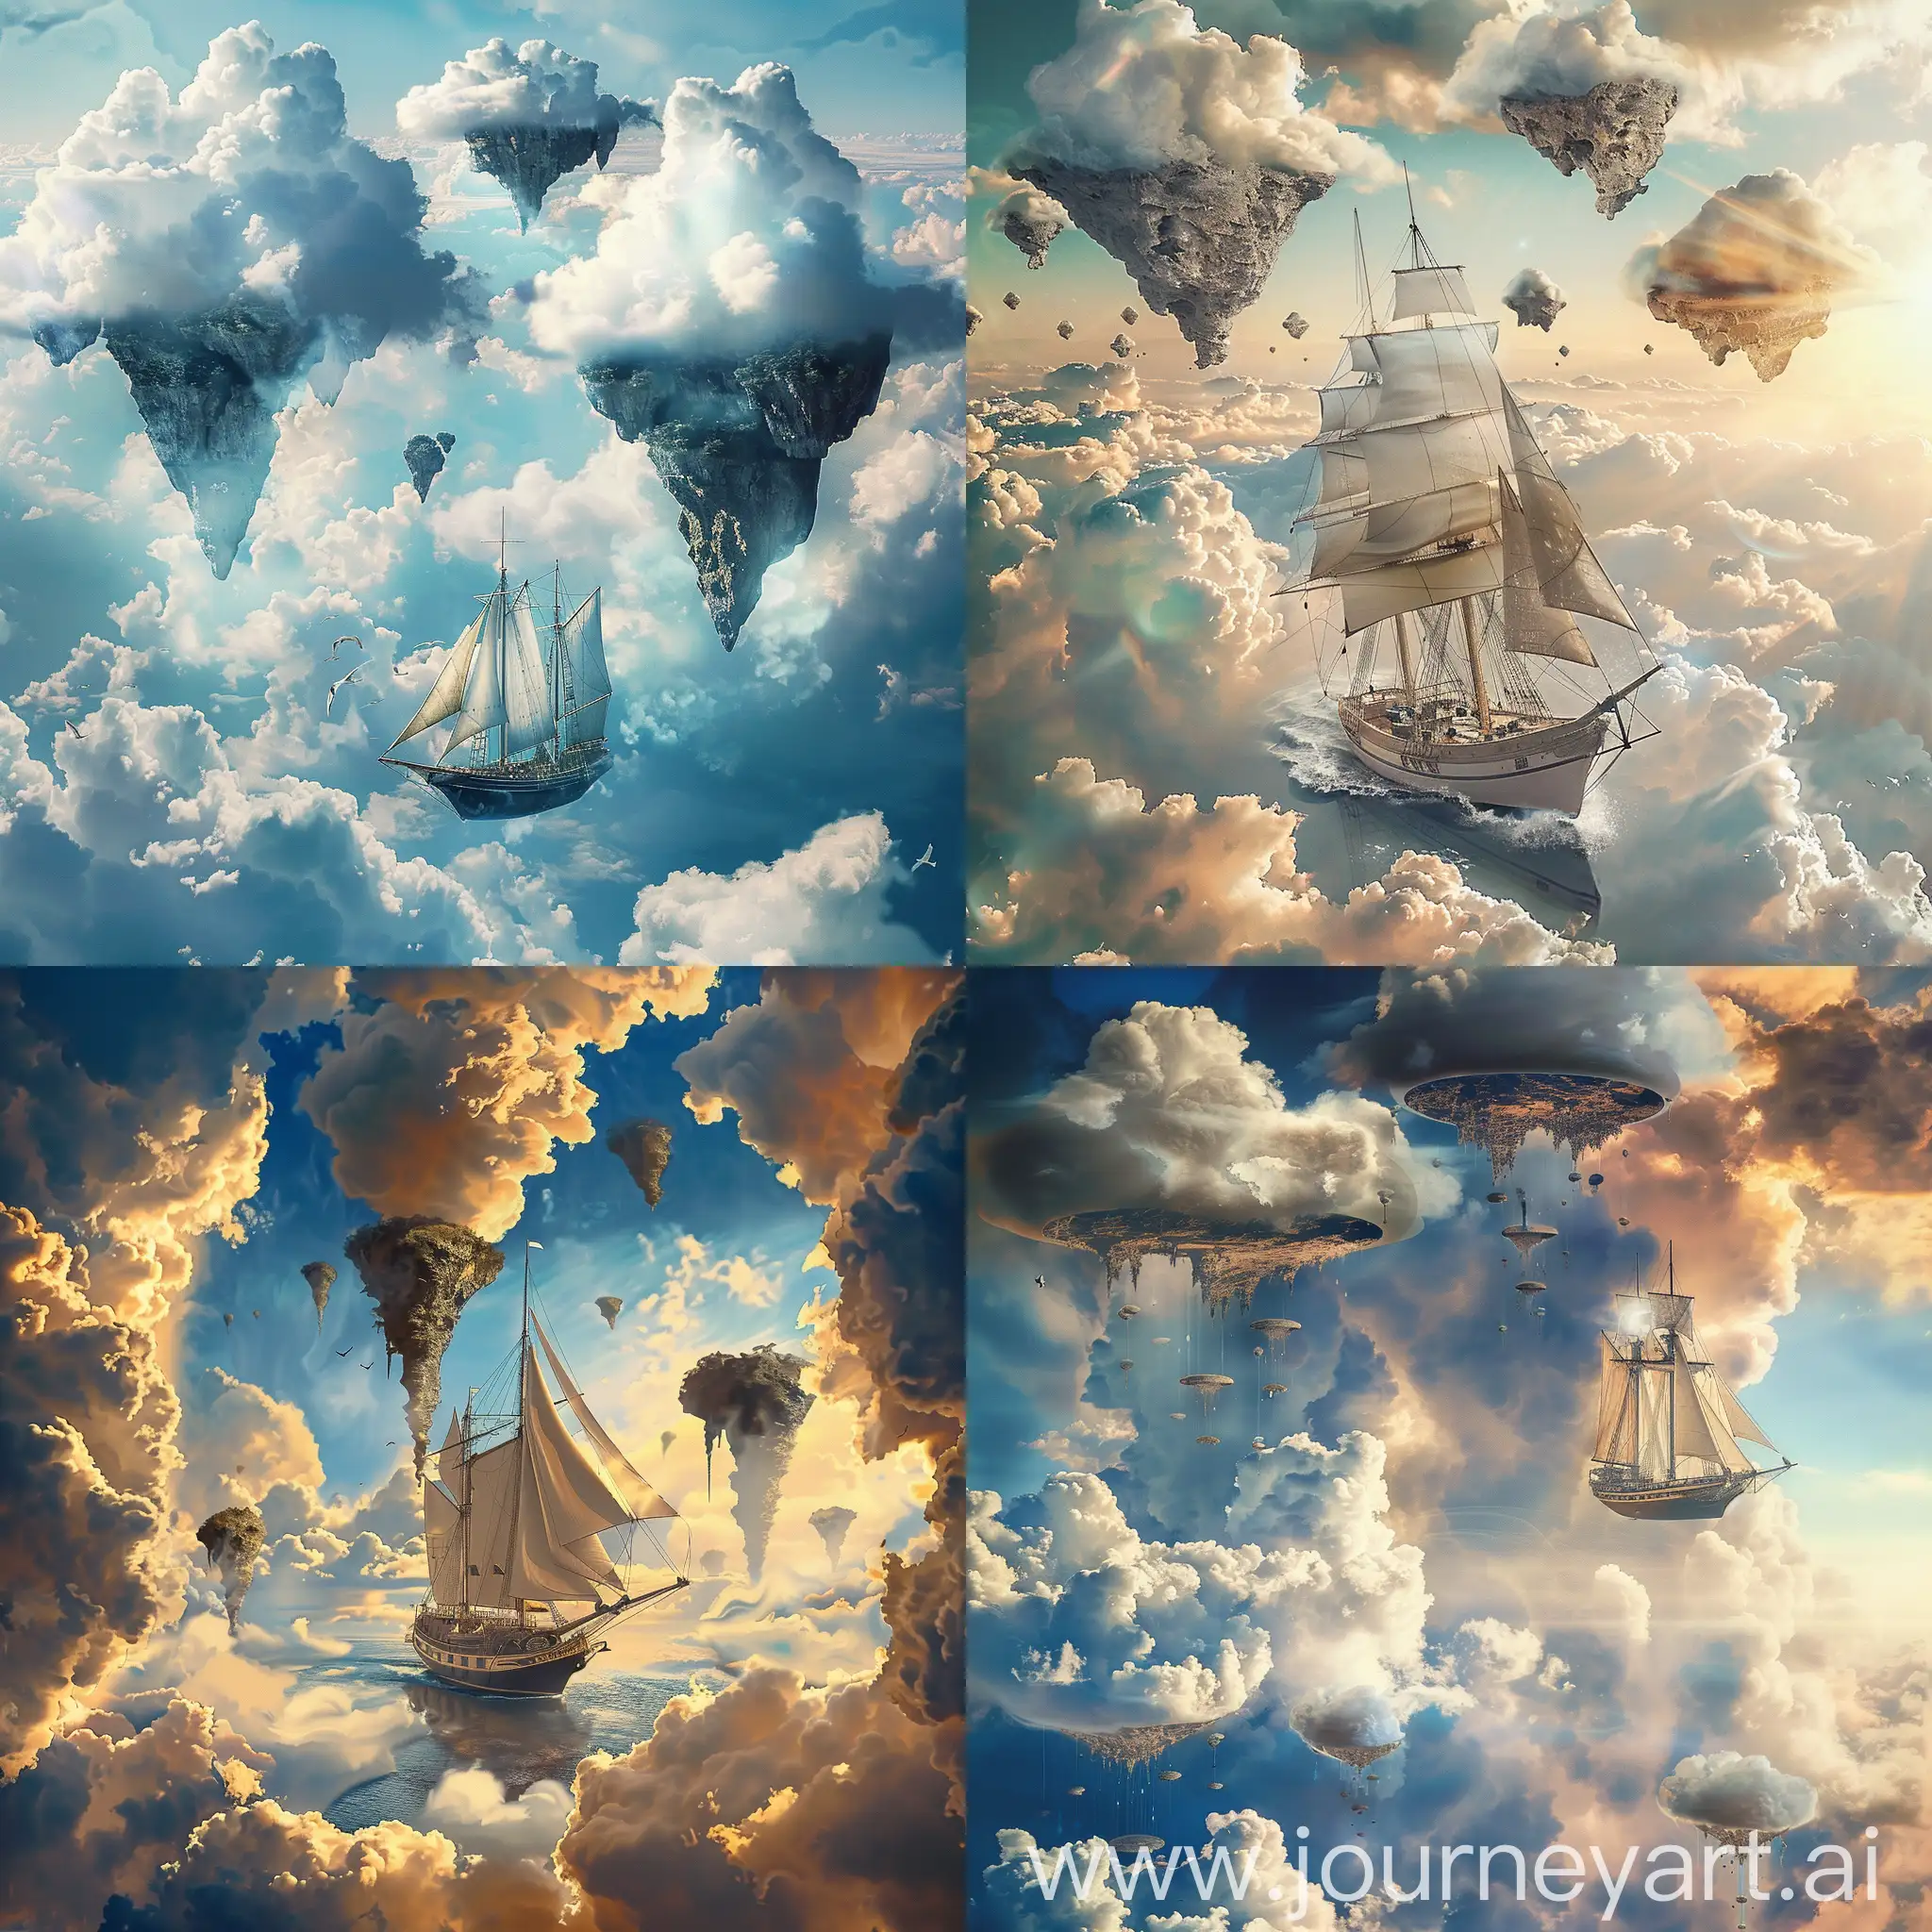 Majestic-Sailing-Ship-Amongst-Floating-Islands-in-CloudFilled-Sky